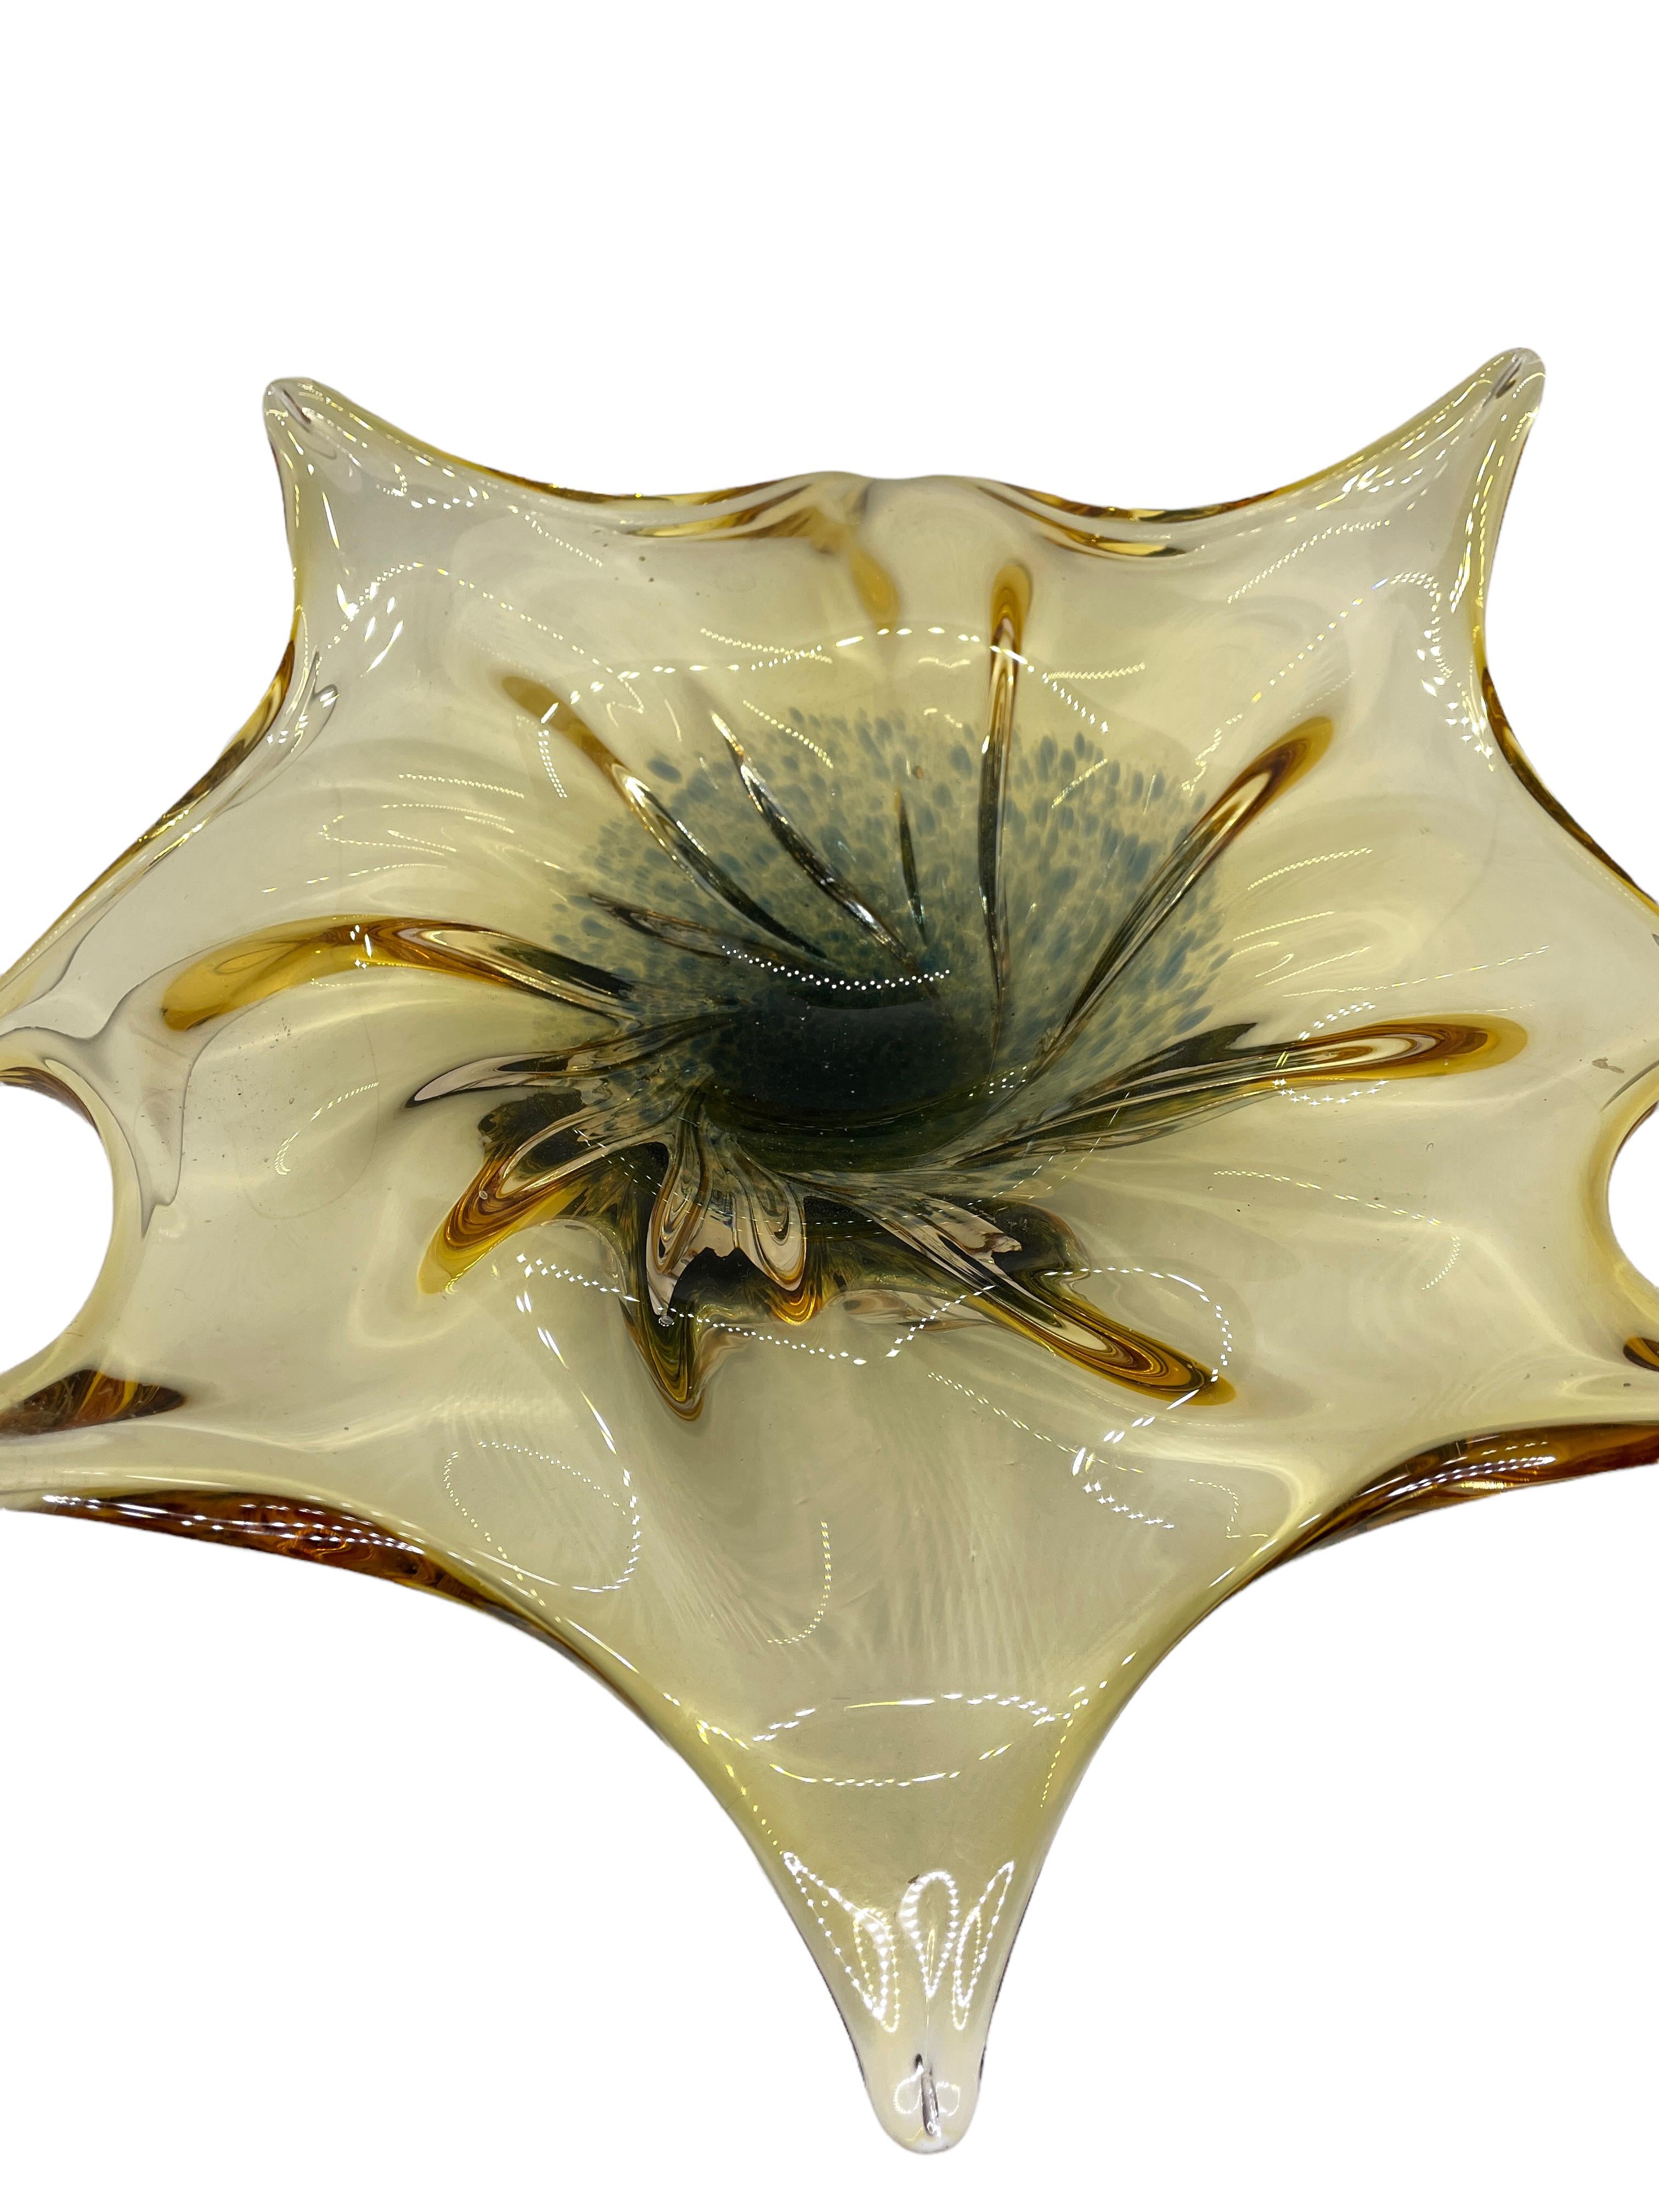 Late 20th Century Stunning Large Organic Murano Glass Bowl Catchall Vintage, Italy, 1970s For Sale